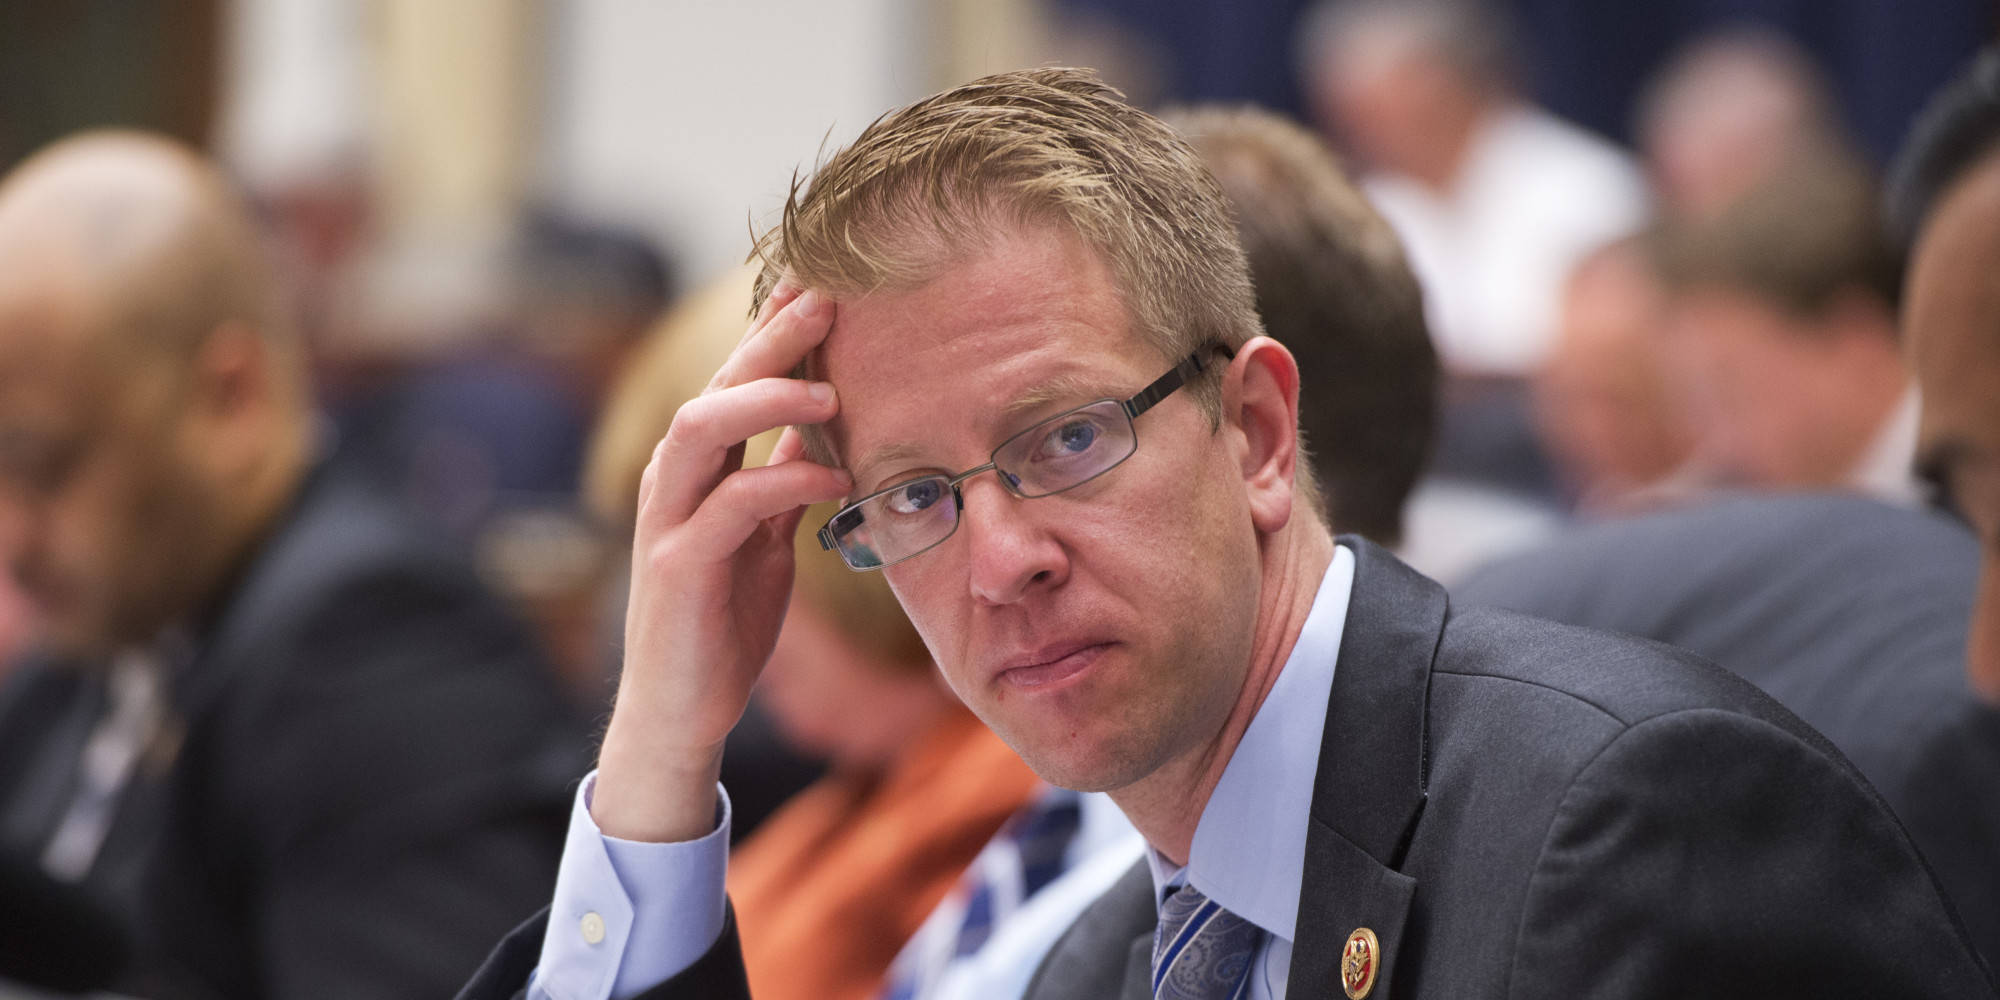 Rep. Derek Kilmer, D-Wash., attends a House Armed Services Committee meeting. (Tom Williams Courtesy Photo)